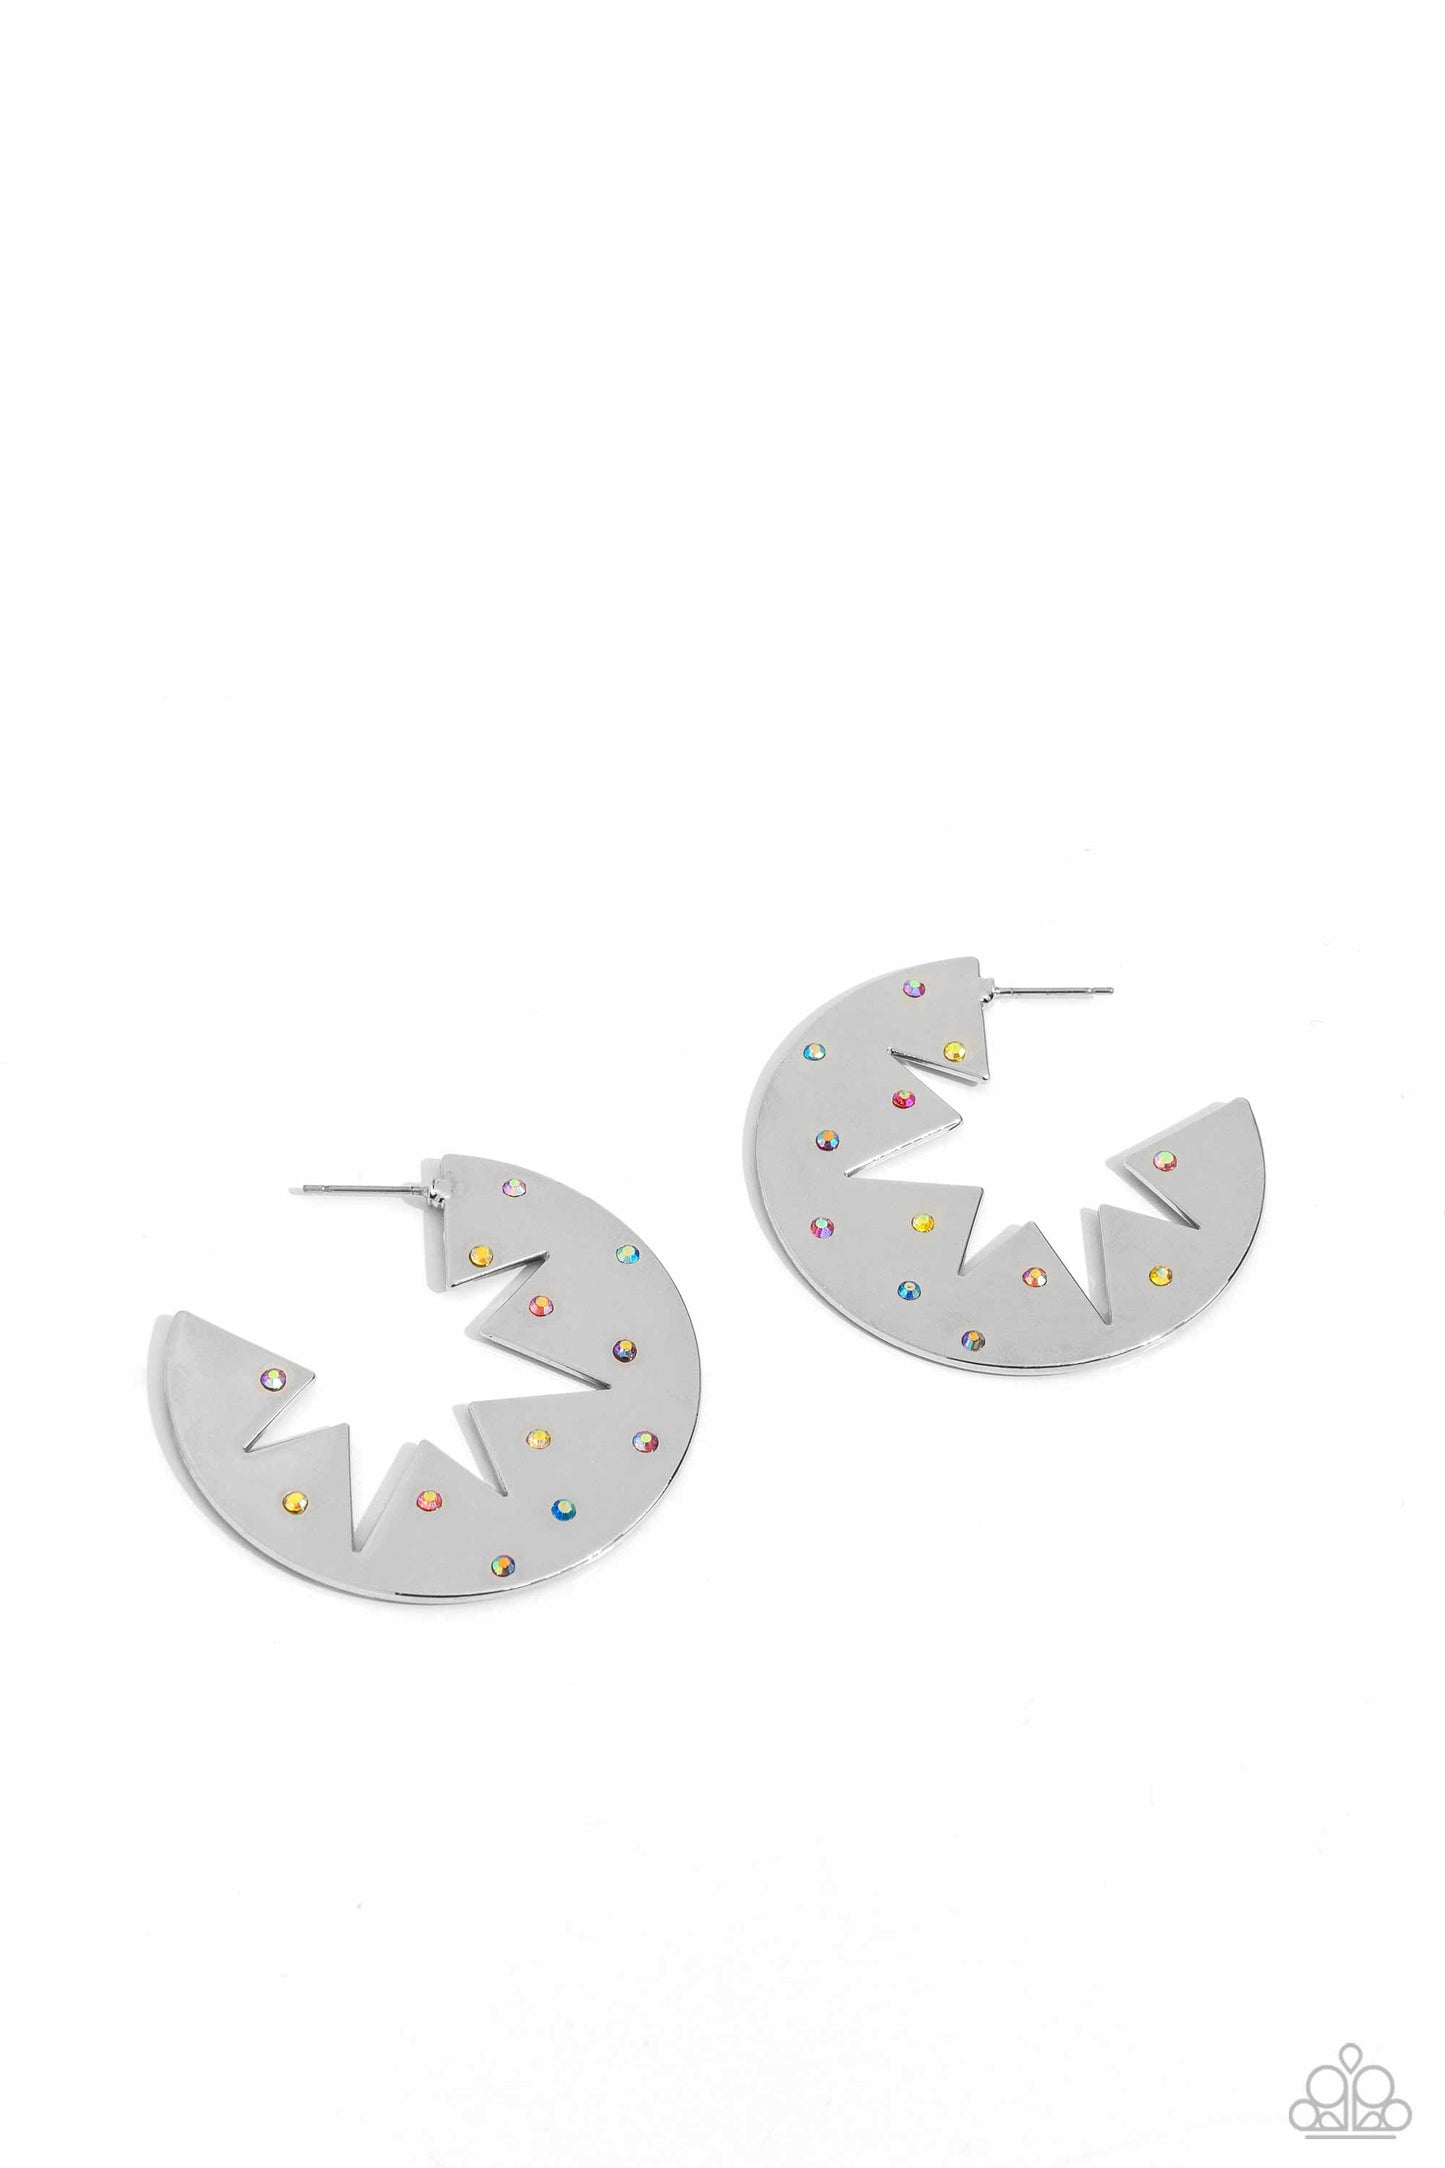 Starry Sensation Multi Star Hoop Earring - Paparazzi Accessories  Sporadically dotted with various multicolored and iridescent rhinestones, a three-dimensional star outline explodes from the center of a polished silver disc for an out-of-this-world centerpiece. Earring attaches to a standard post fitting. Hoop measures approximately 1 3/4" in diameter. Due to its prismatic palette, color may vary.  Sold as one pair of hoop earrings.  Sku:  P5HO-MTSV-324XX